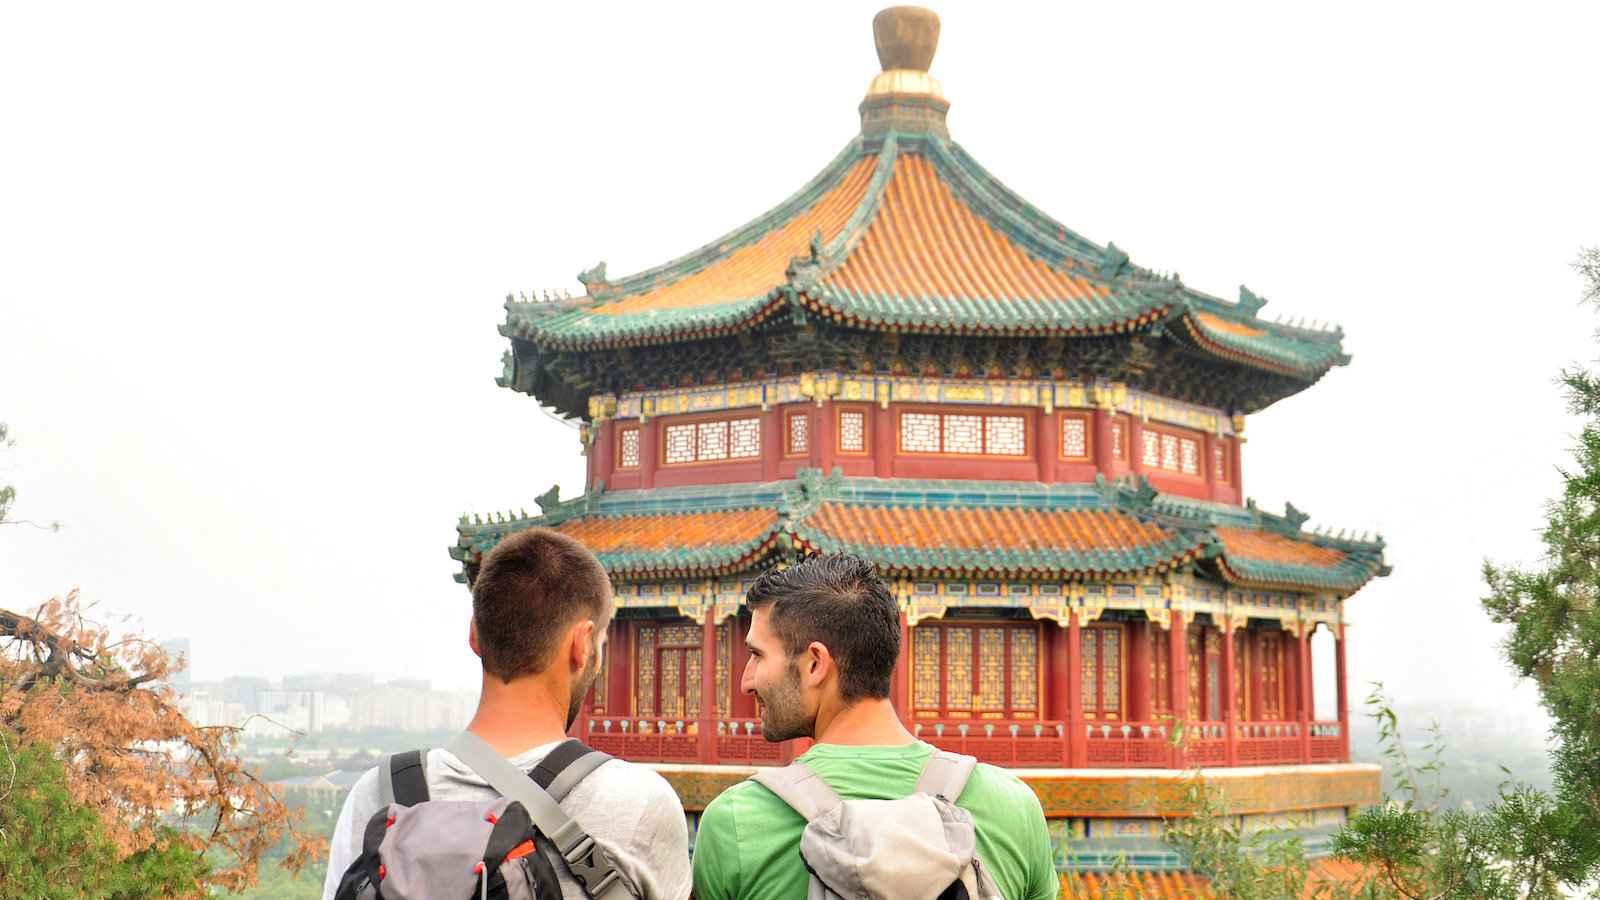 Beijing is a very safe destination for gay travelers, mostly because the locals love meeting foreigners!